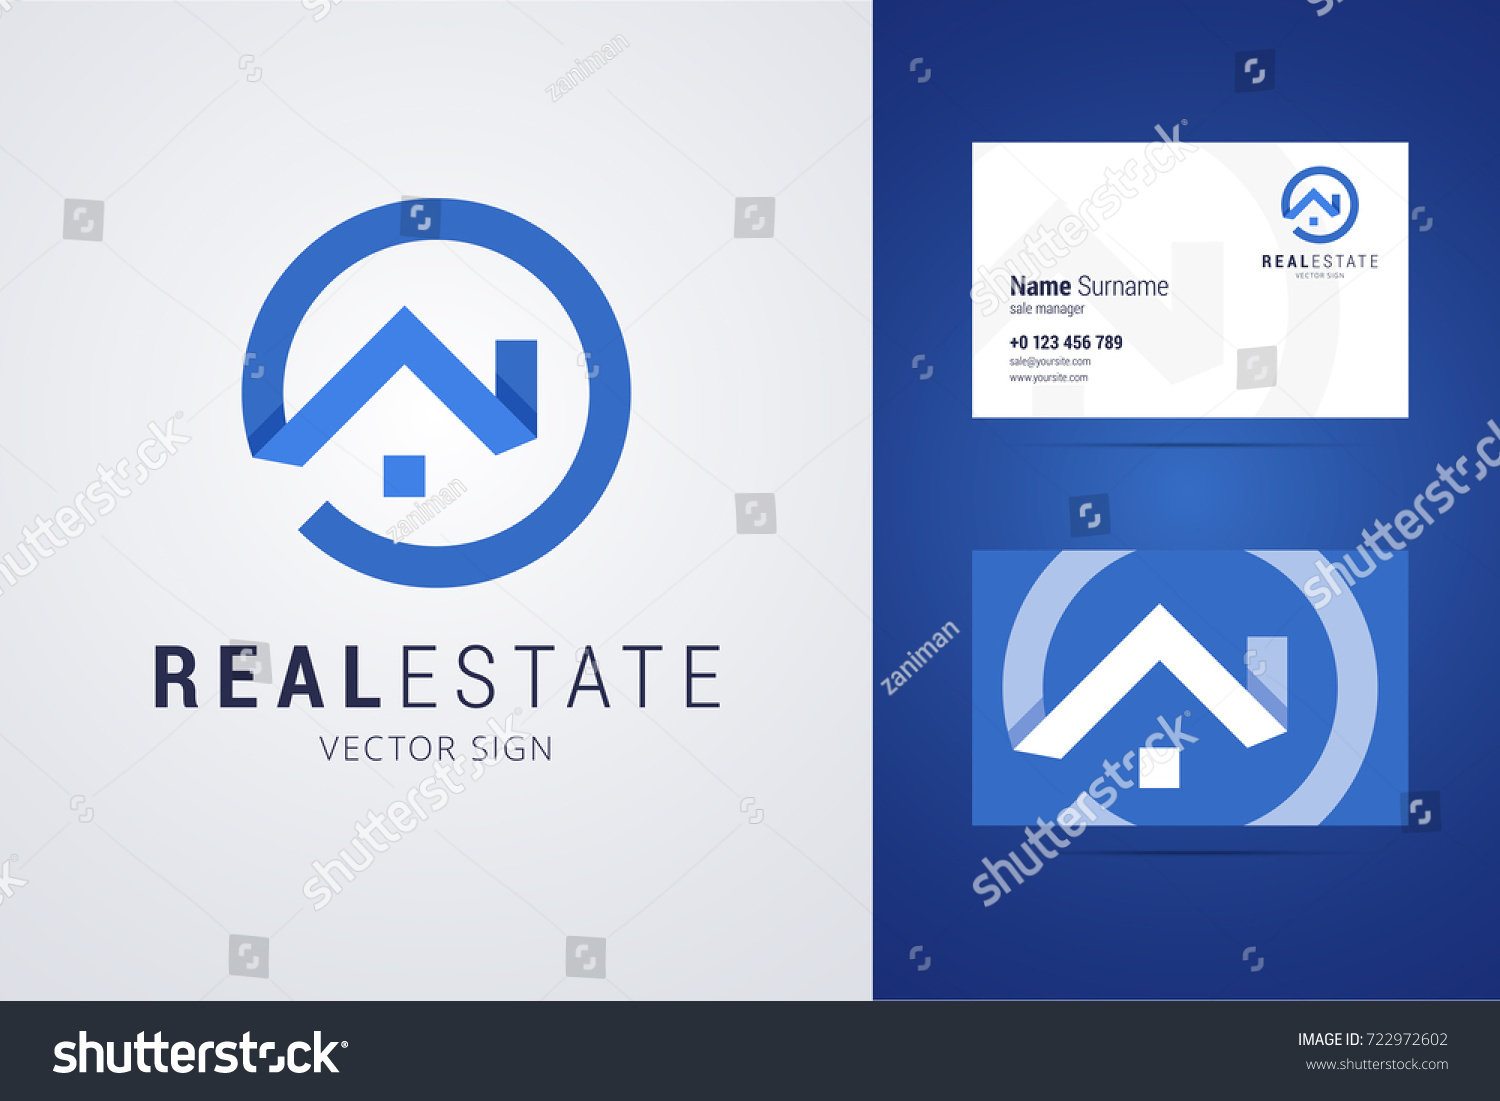 Real Estate Sign Template from image.shutterstock.com